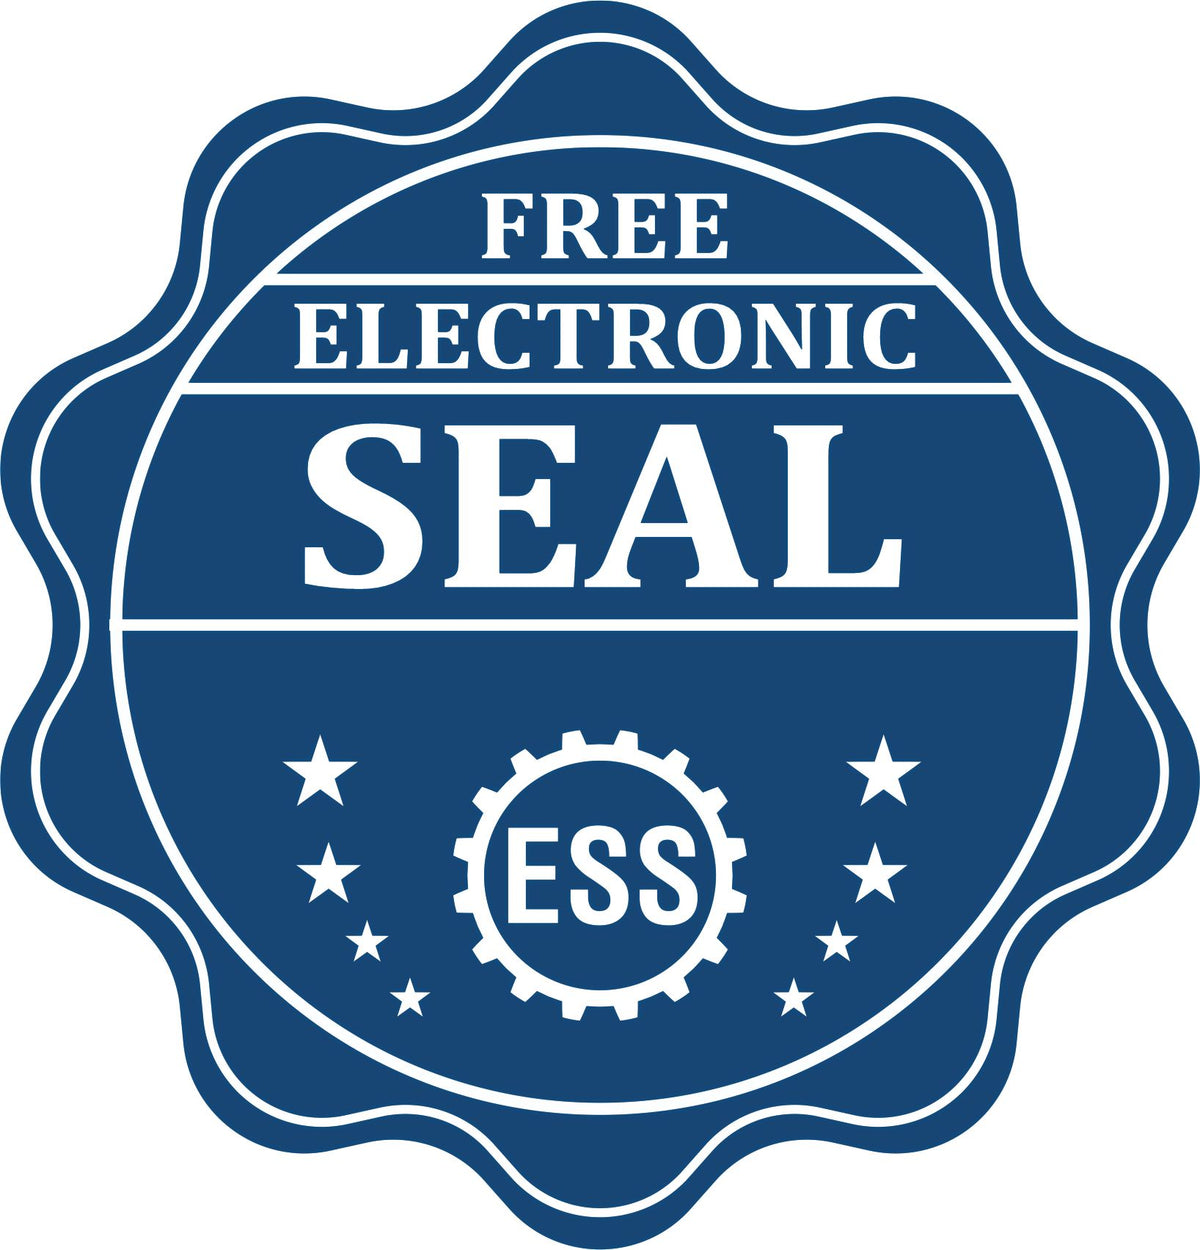 A badge showing a free electronic seal for the State of Maryland Soft Land Surveyor Embossing Seal with stars and the ESS gear on the emblem.